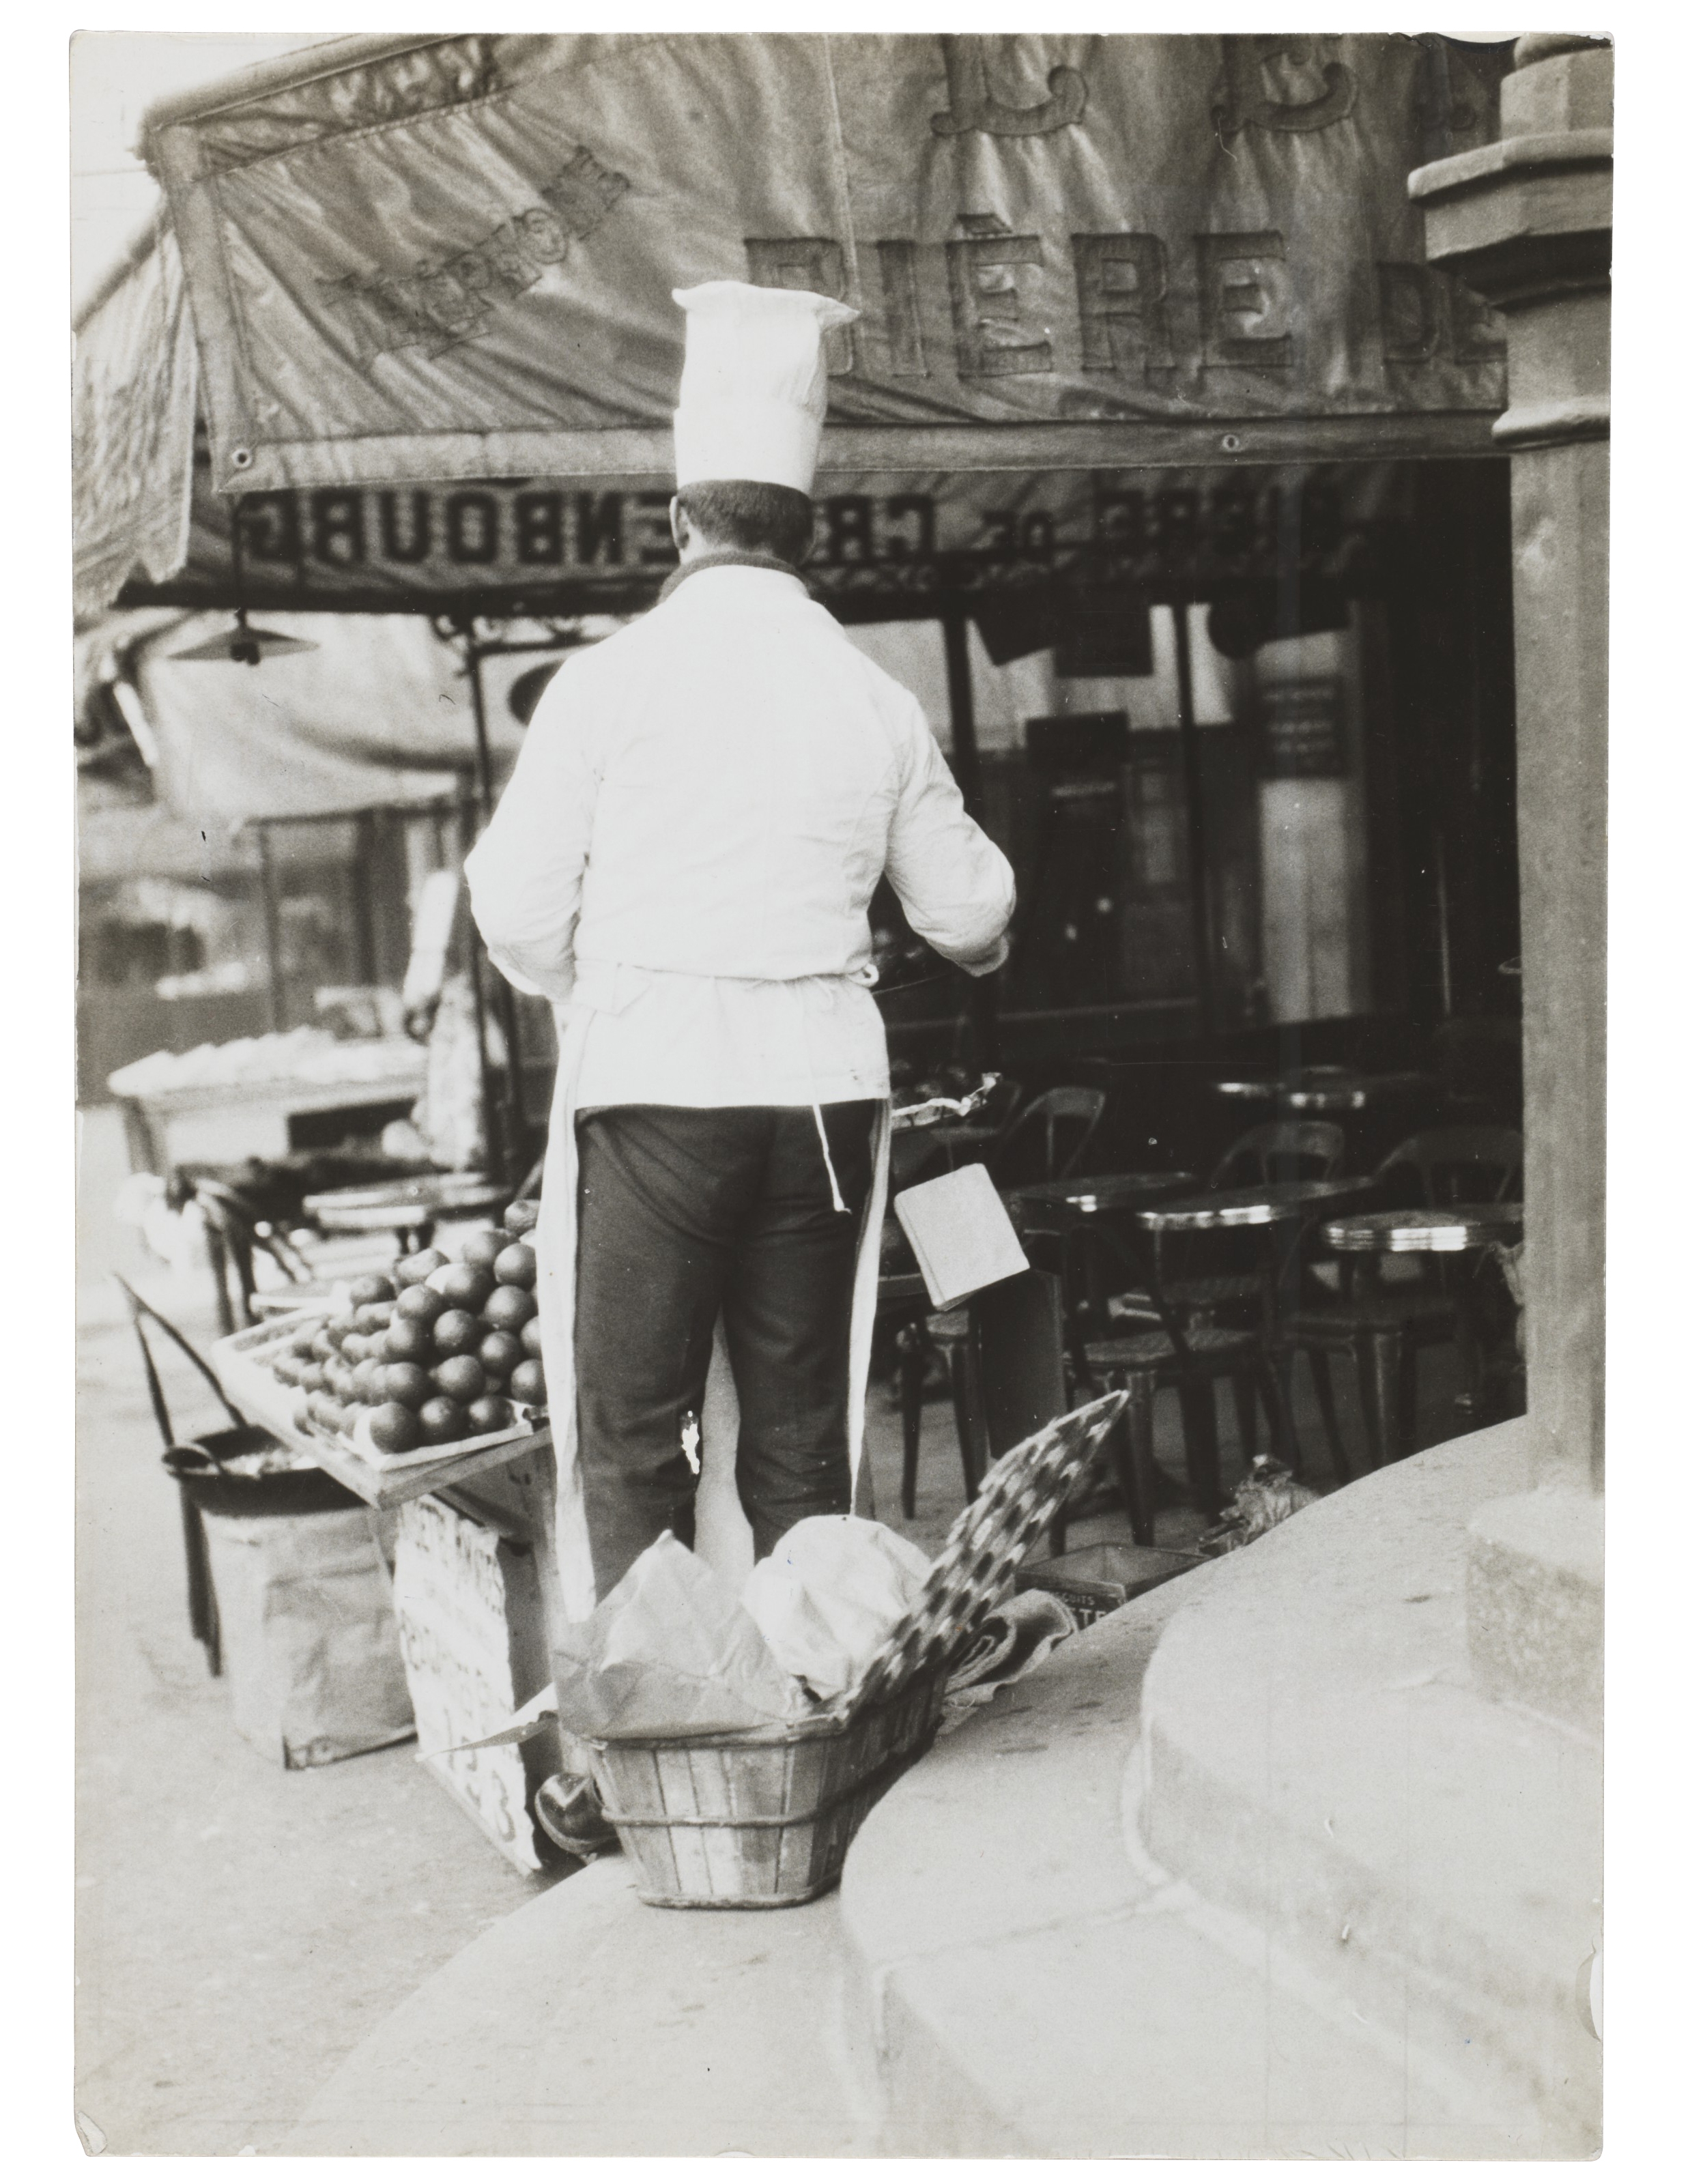 Chef examining freshly delivered produce for the day ahead (Paris) by Germaine Krull, circa 1931